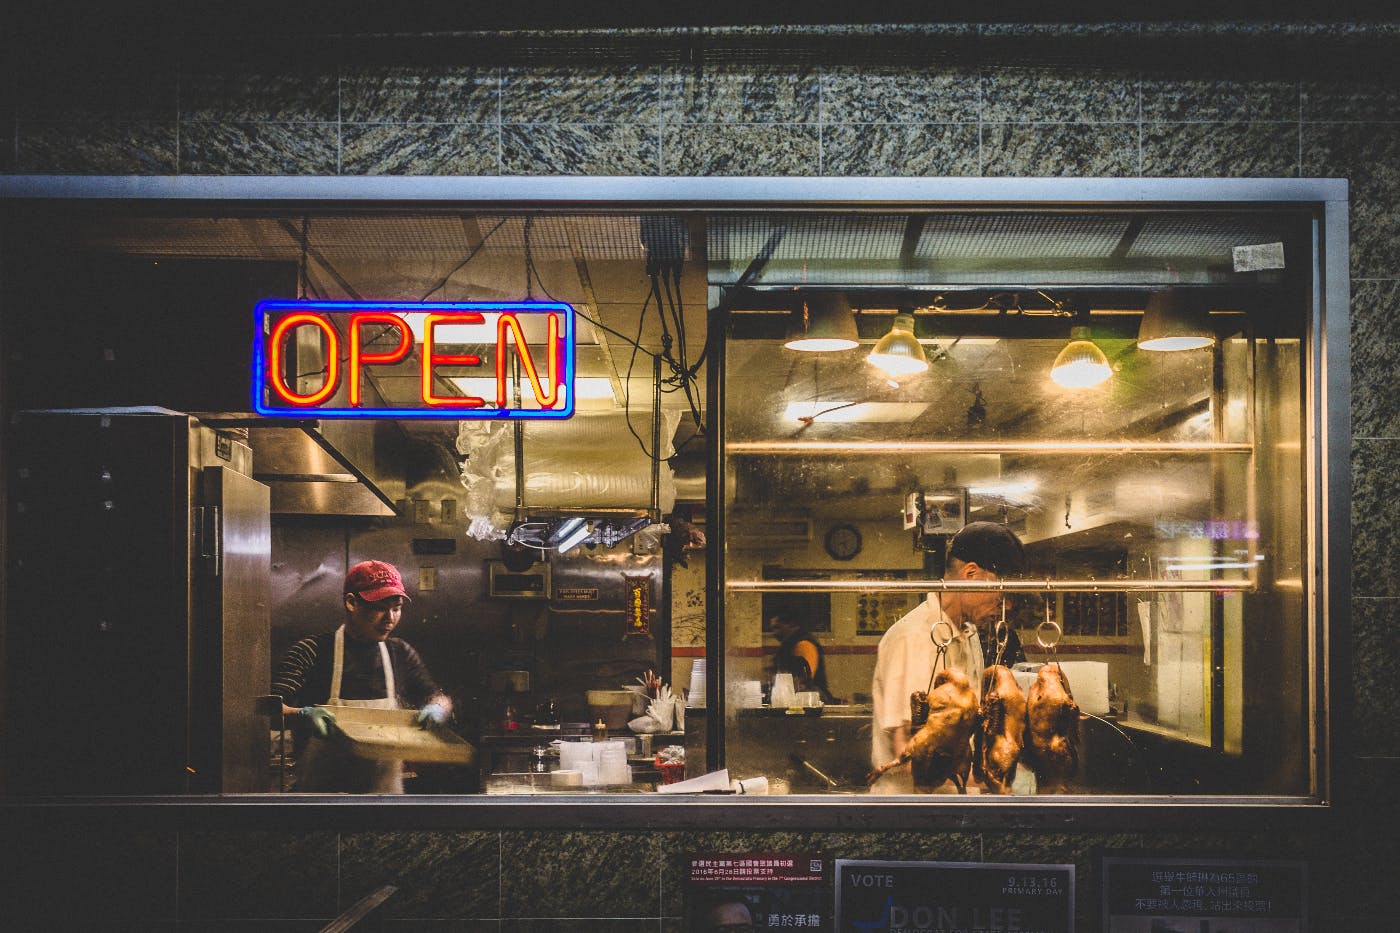 Two men in the window of a Chinese restaurant